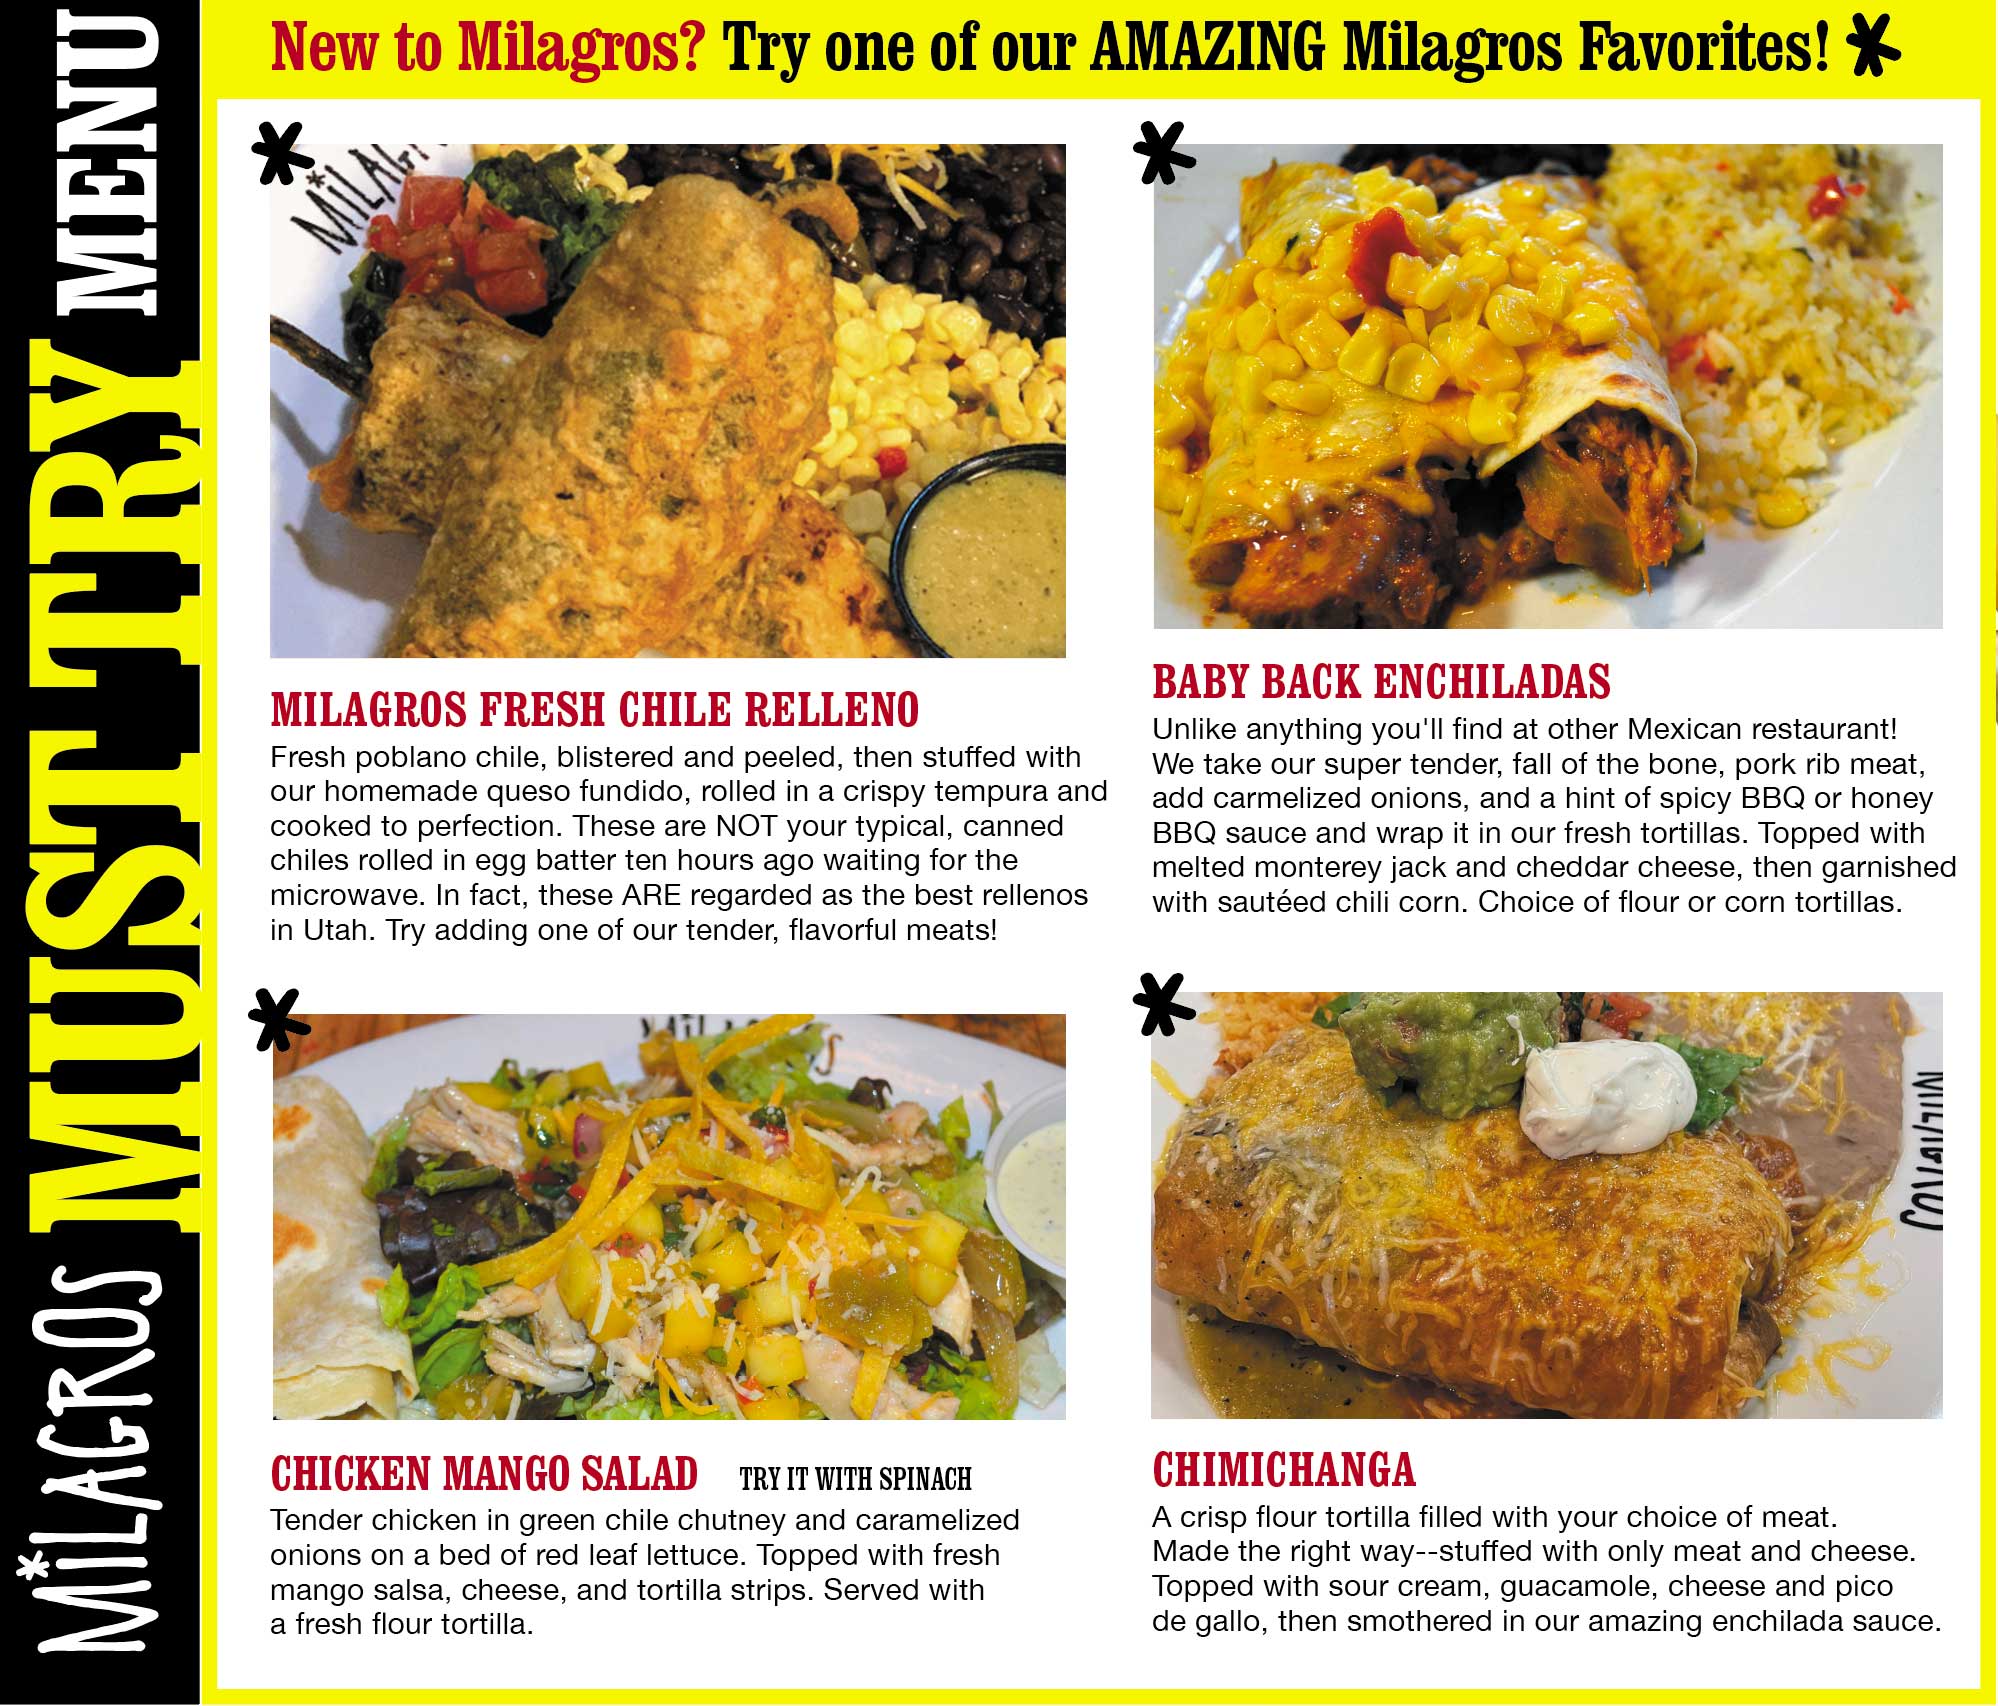 Milagros Mexican food favorites to try